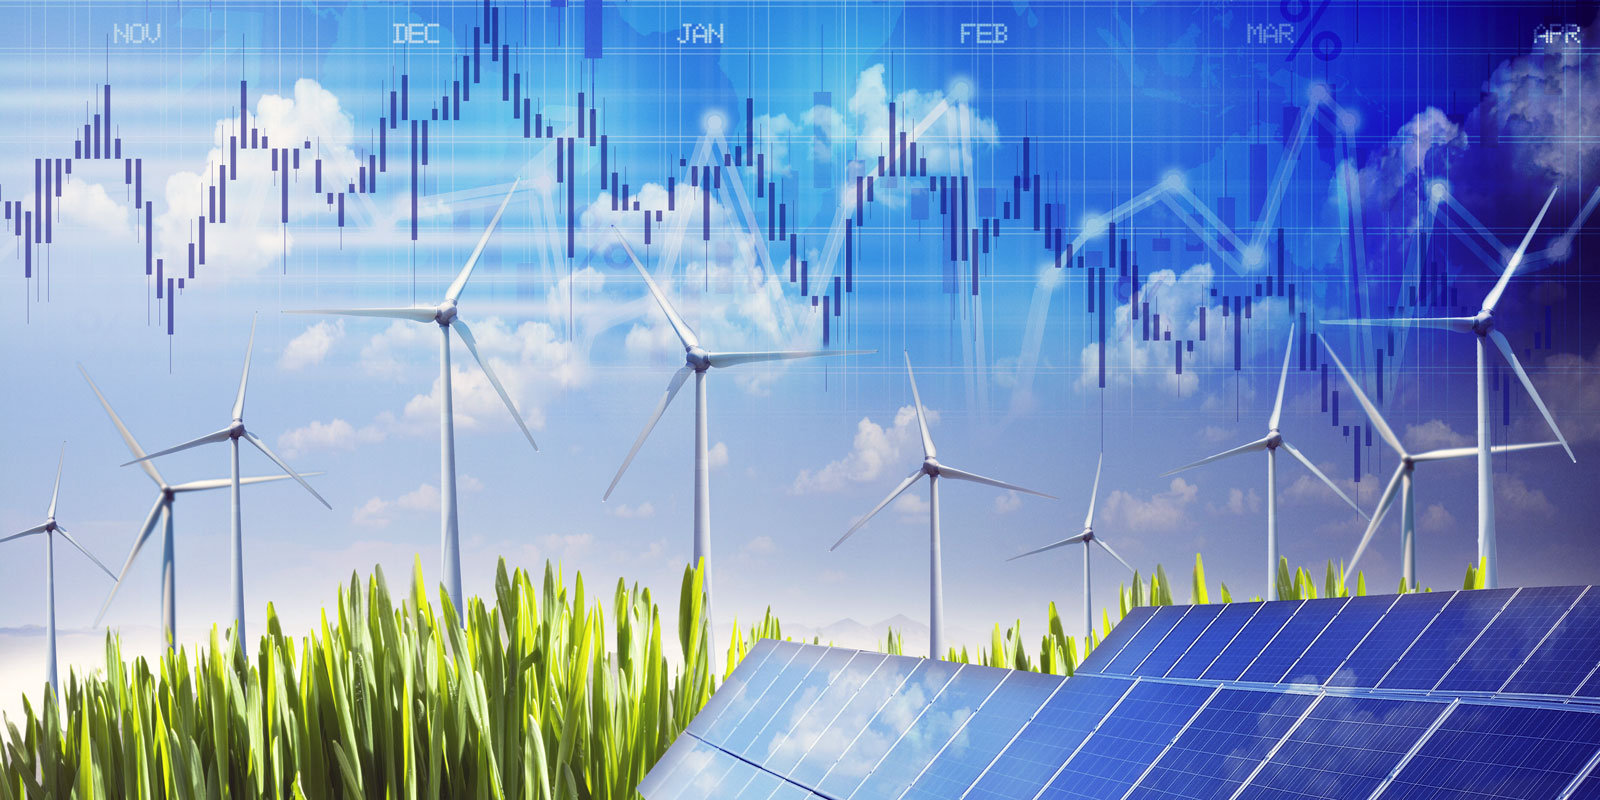 Enlarged view: As renewable energy is more capital-intensive than fossil fuels, the costs rise more sharply with rising interest rates, making it less attractive. (Image: Shutterstock)